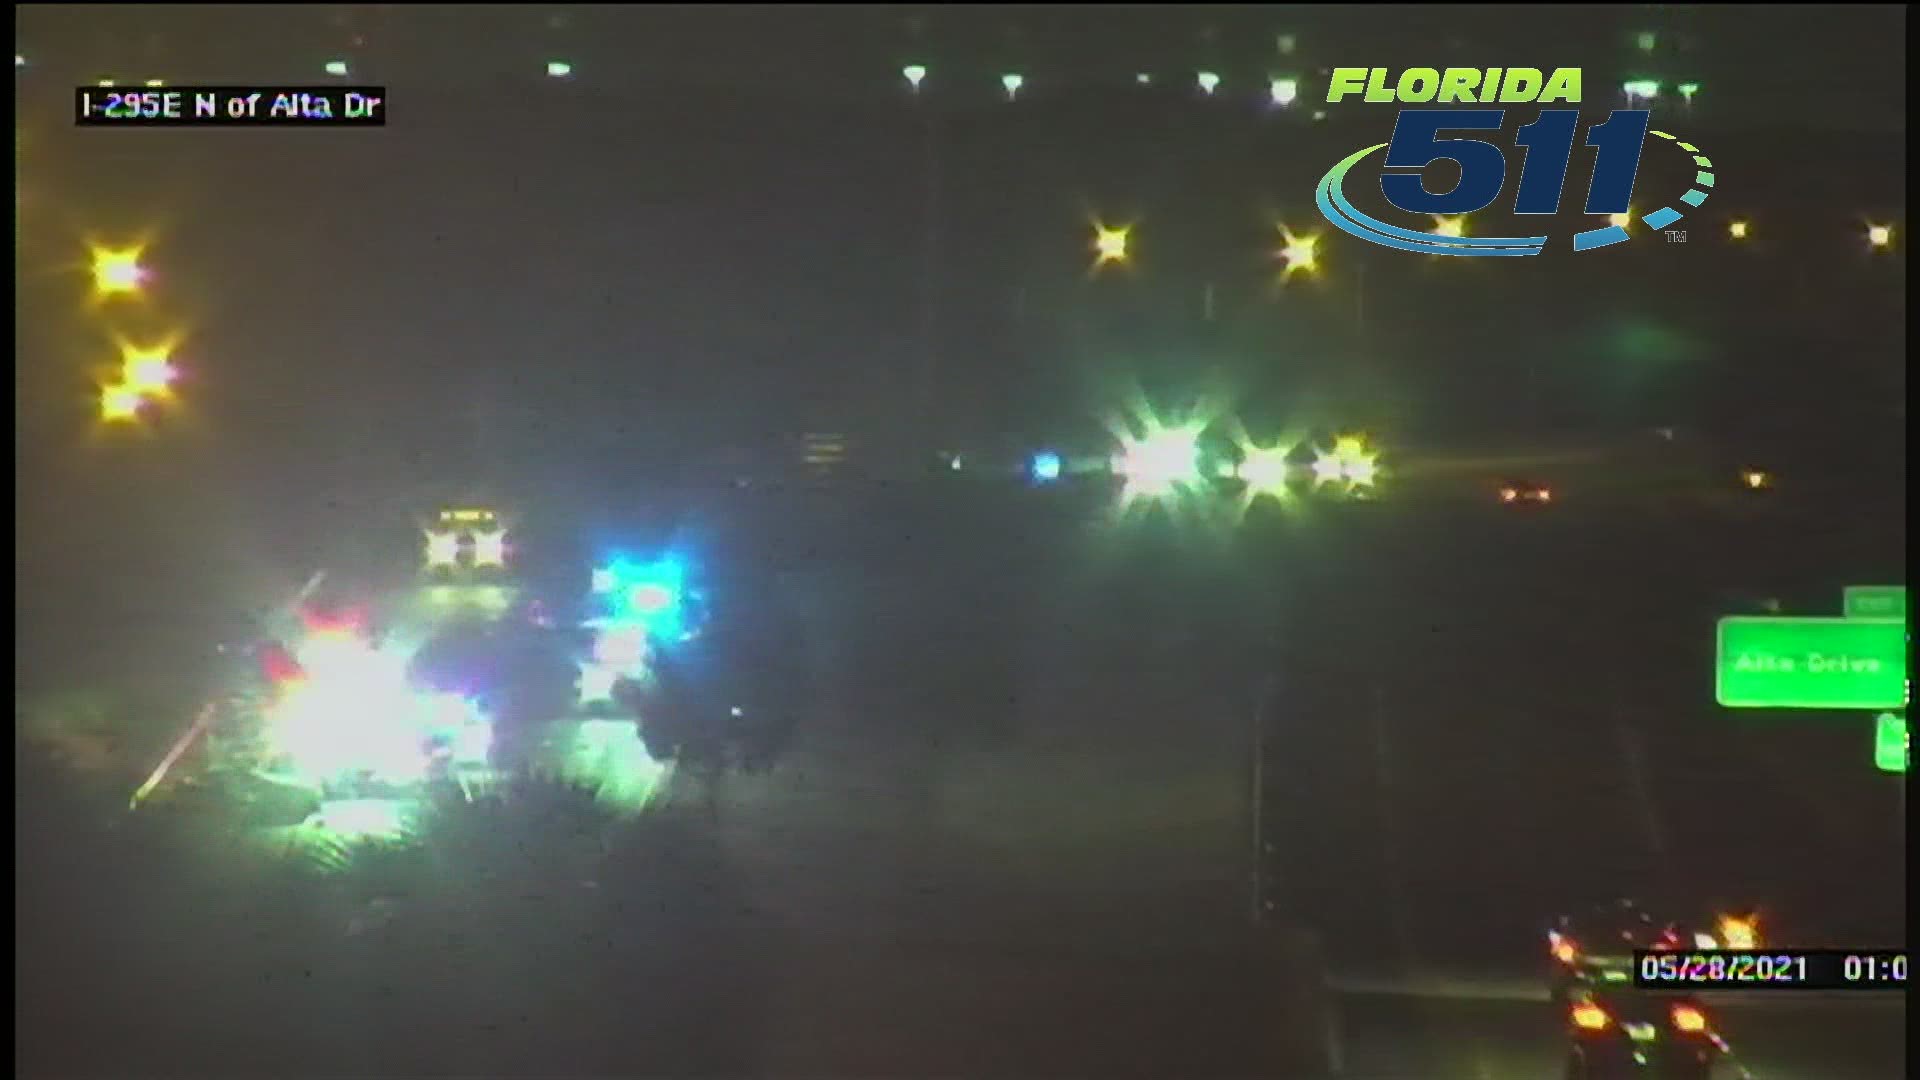 The Florida Highway Patrol was called to the area around 12:34 a.m. All lanes are blocked, and traffic is being detoured onto Alta Drive, FHP says.